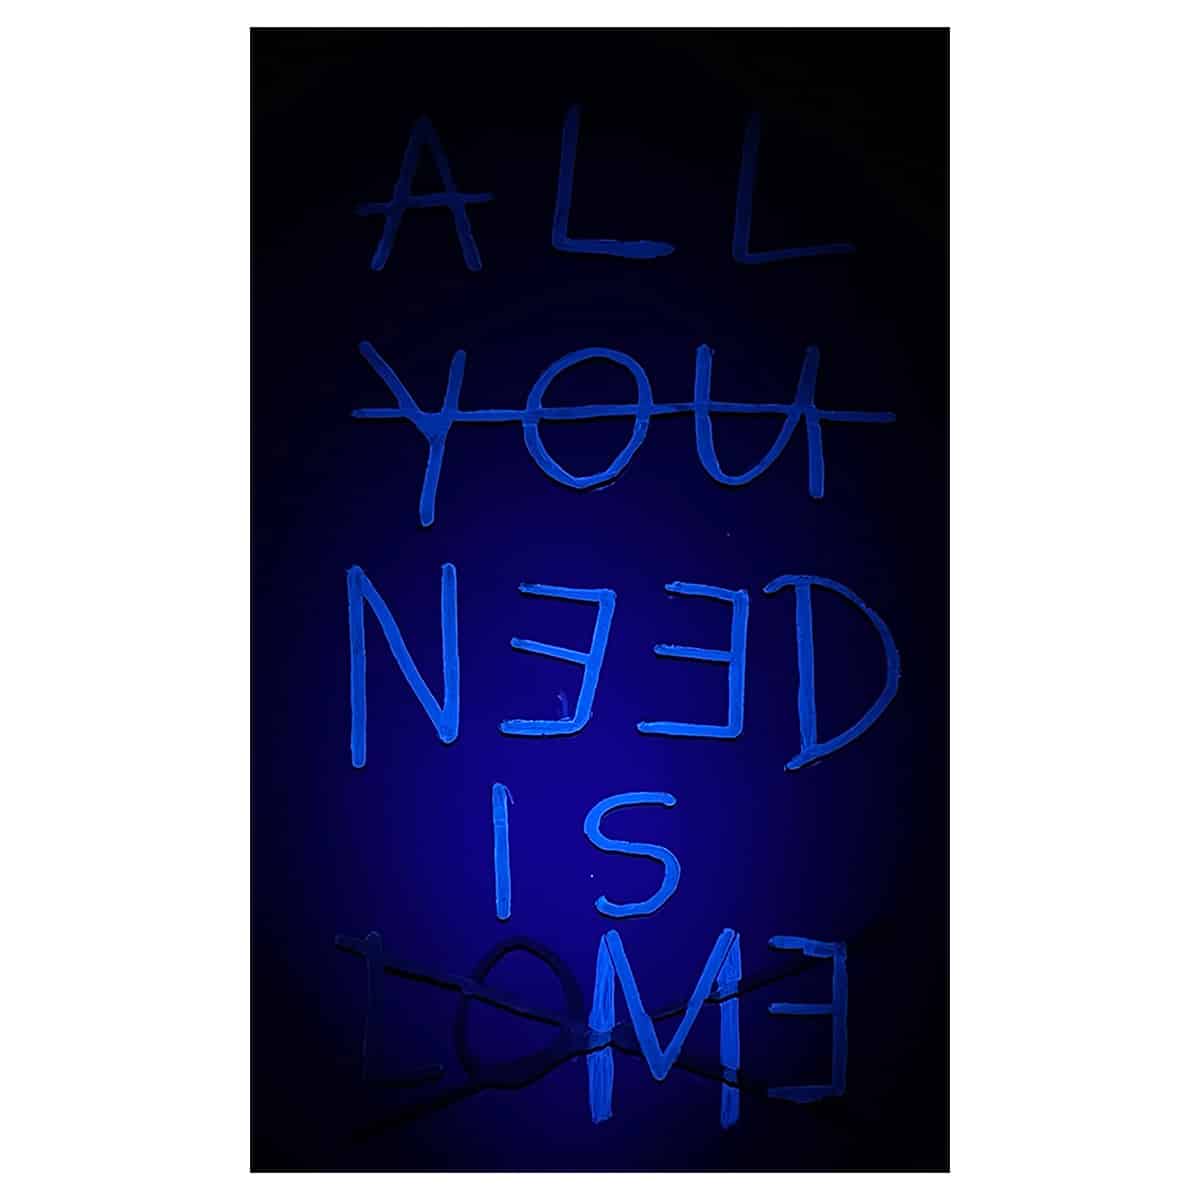 Textwork - _0006_ALL YOU NEED IS blacklight - Frank Willems